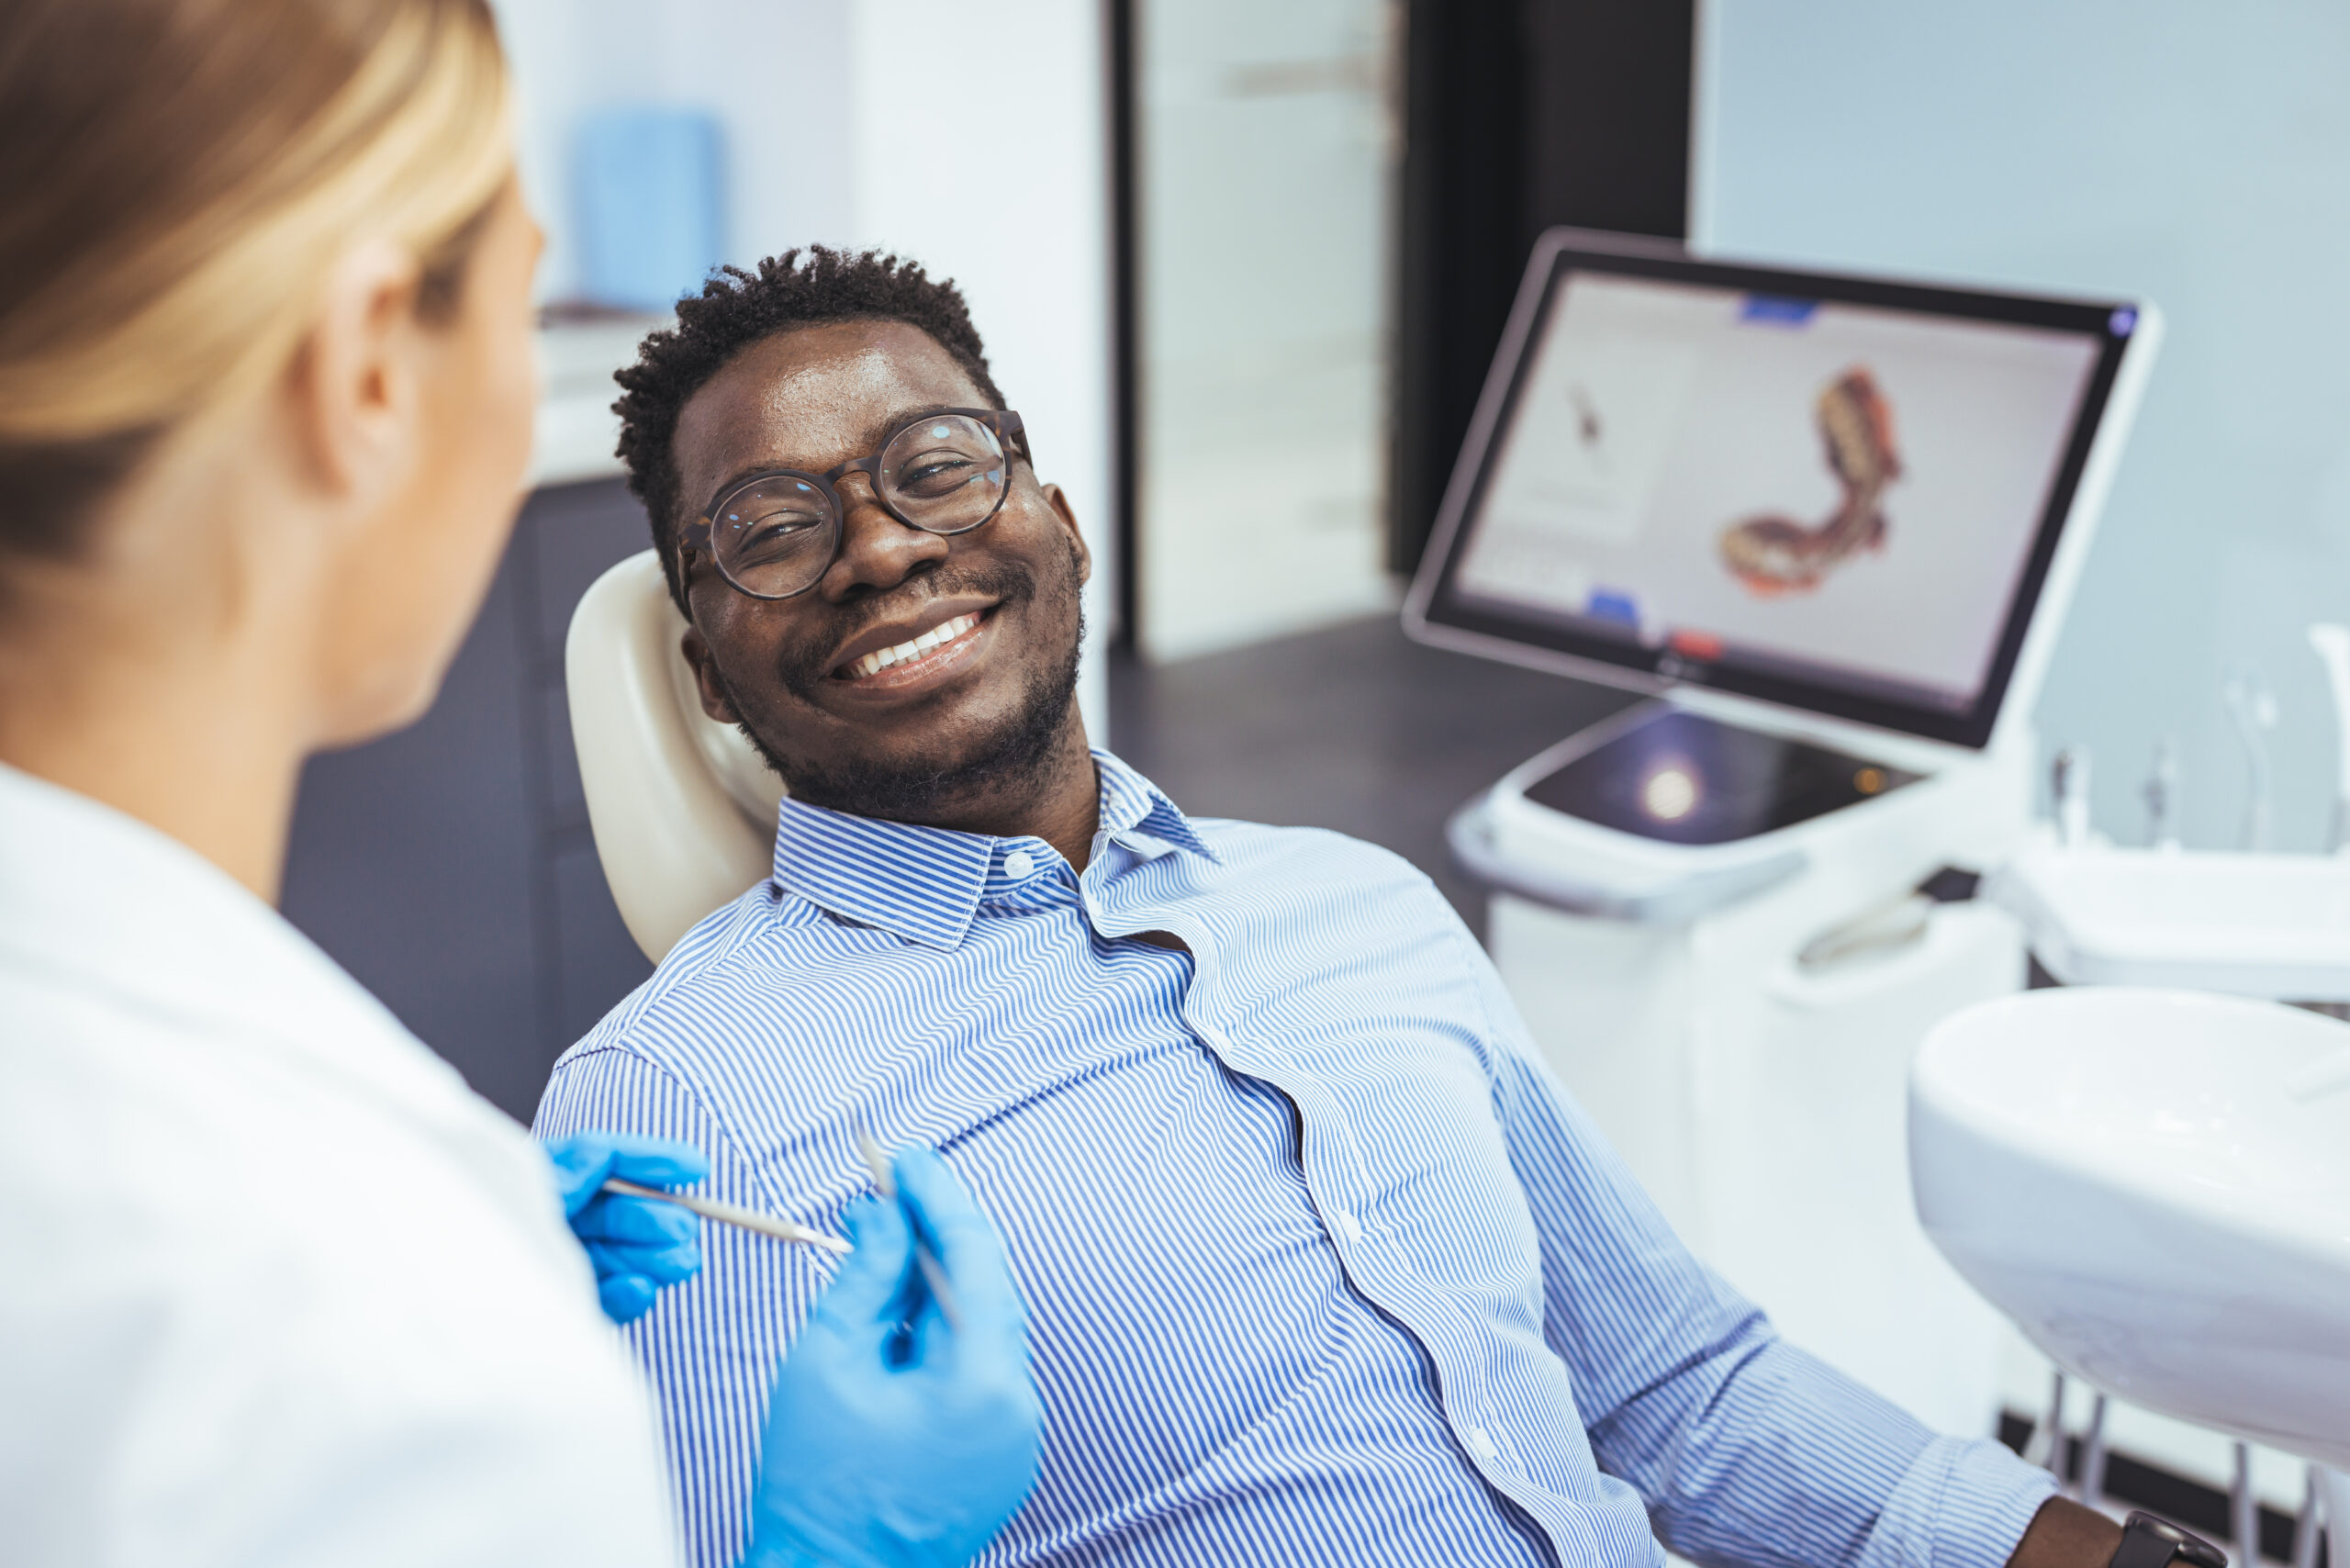 Young african-american man visiting dentist's office for prevention and treatment of the oral cavity. Man and male doctor while checkup teeth. Healthy lifestyle, healthcare and medicine concept.